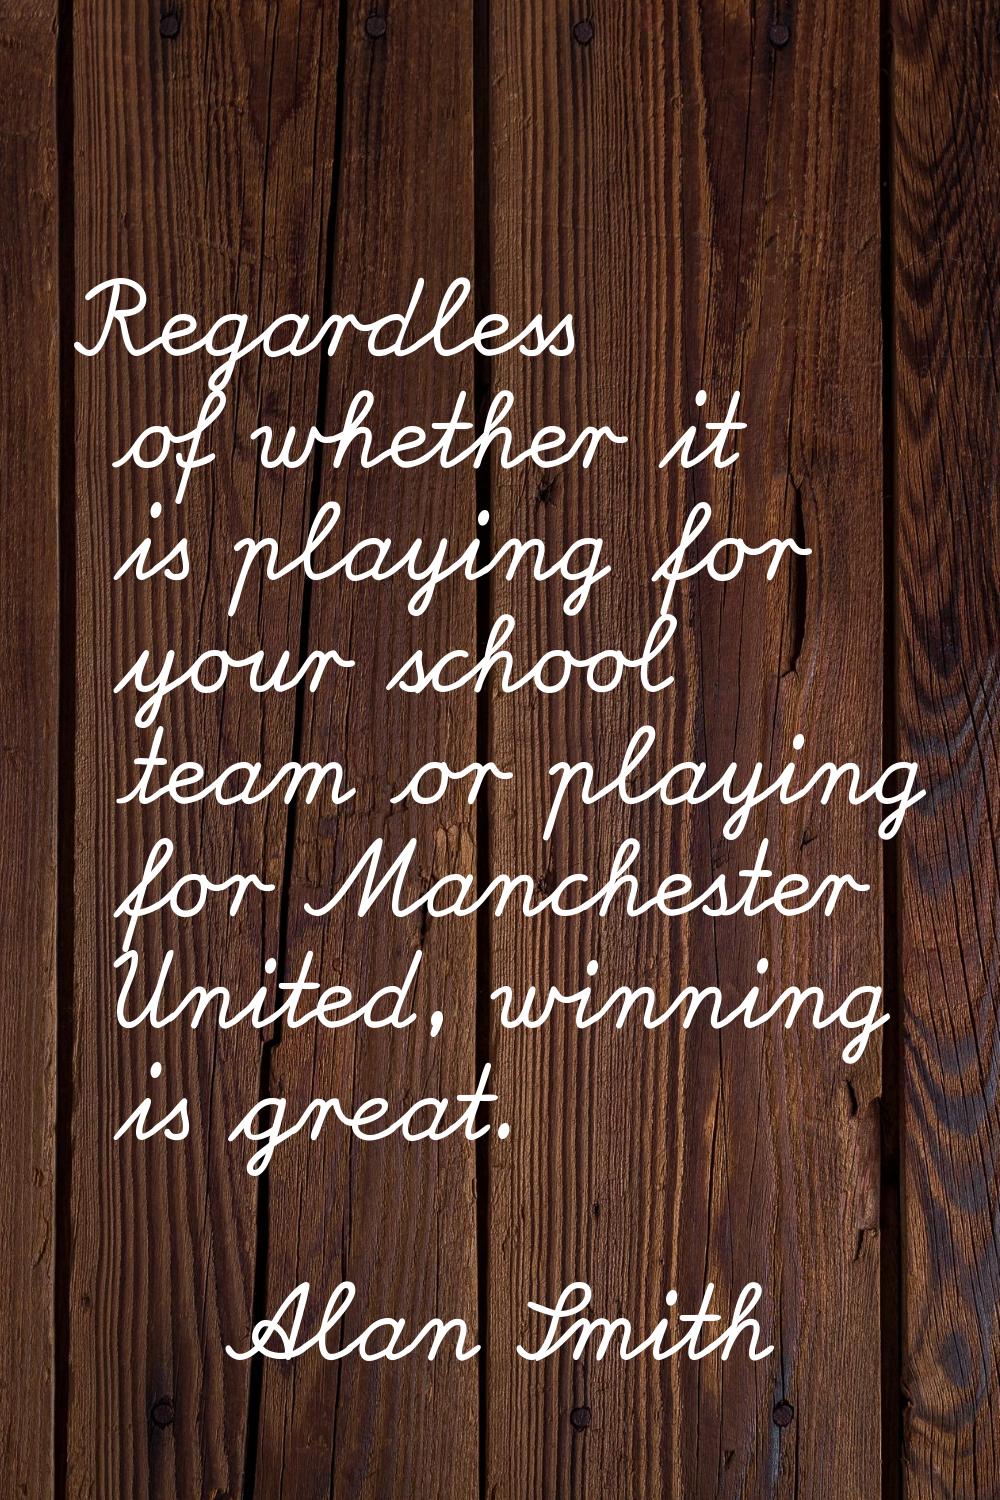 Regardless of whether it is playing for your school team or playing for Manchester United, winning 